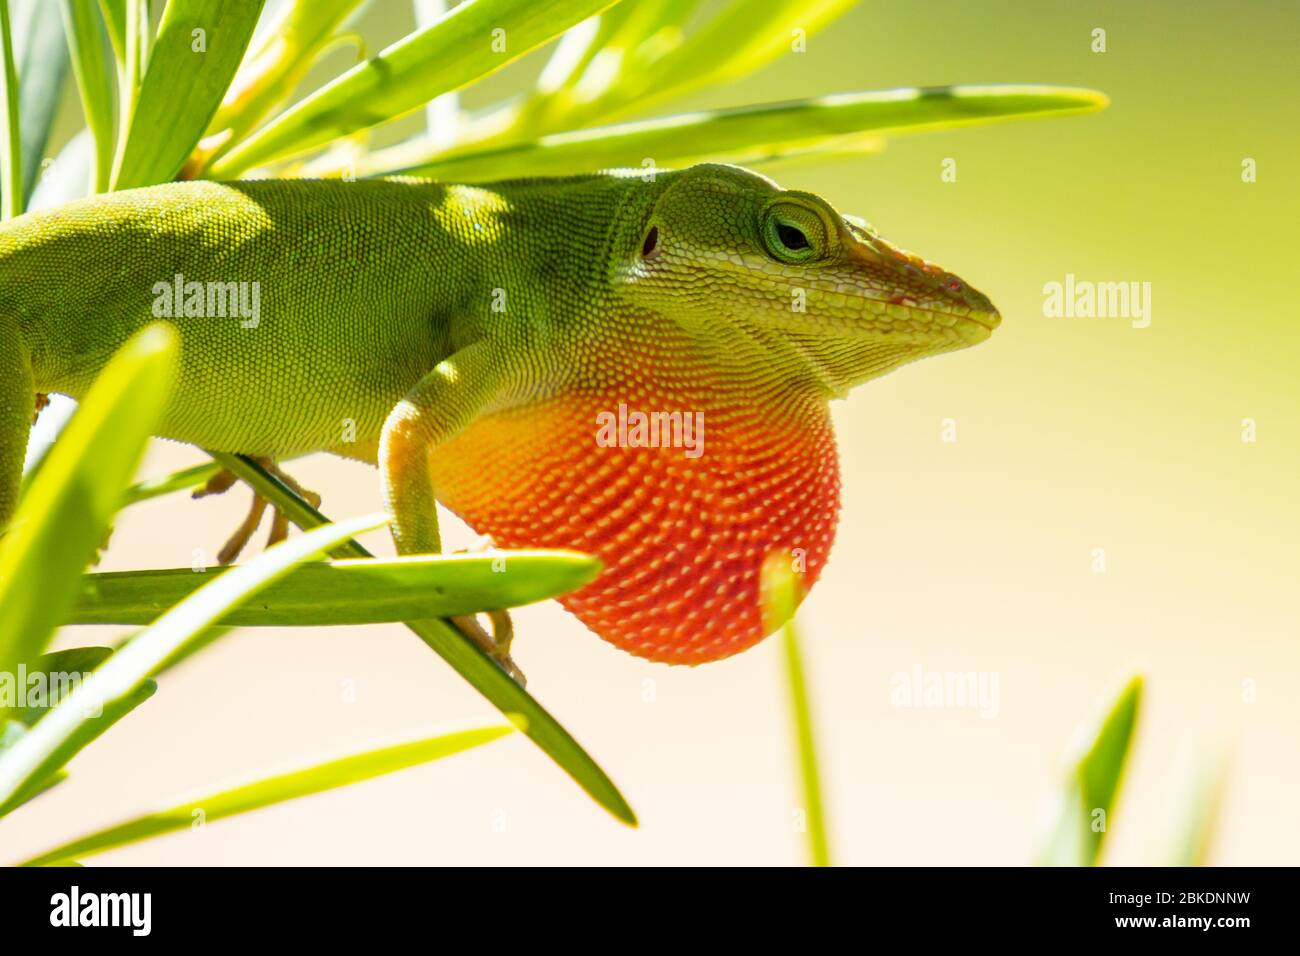 Green Anole lizard with throat puffed up Stock Photo